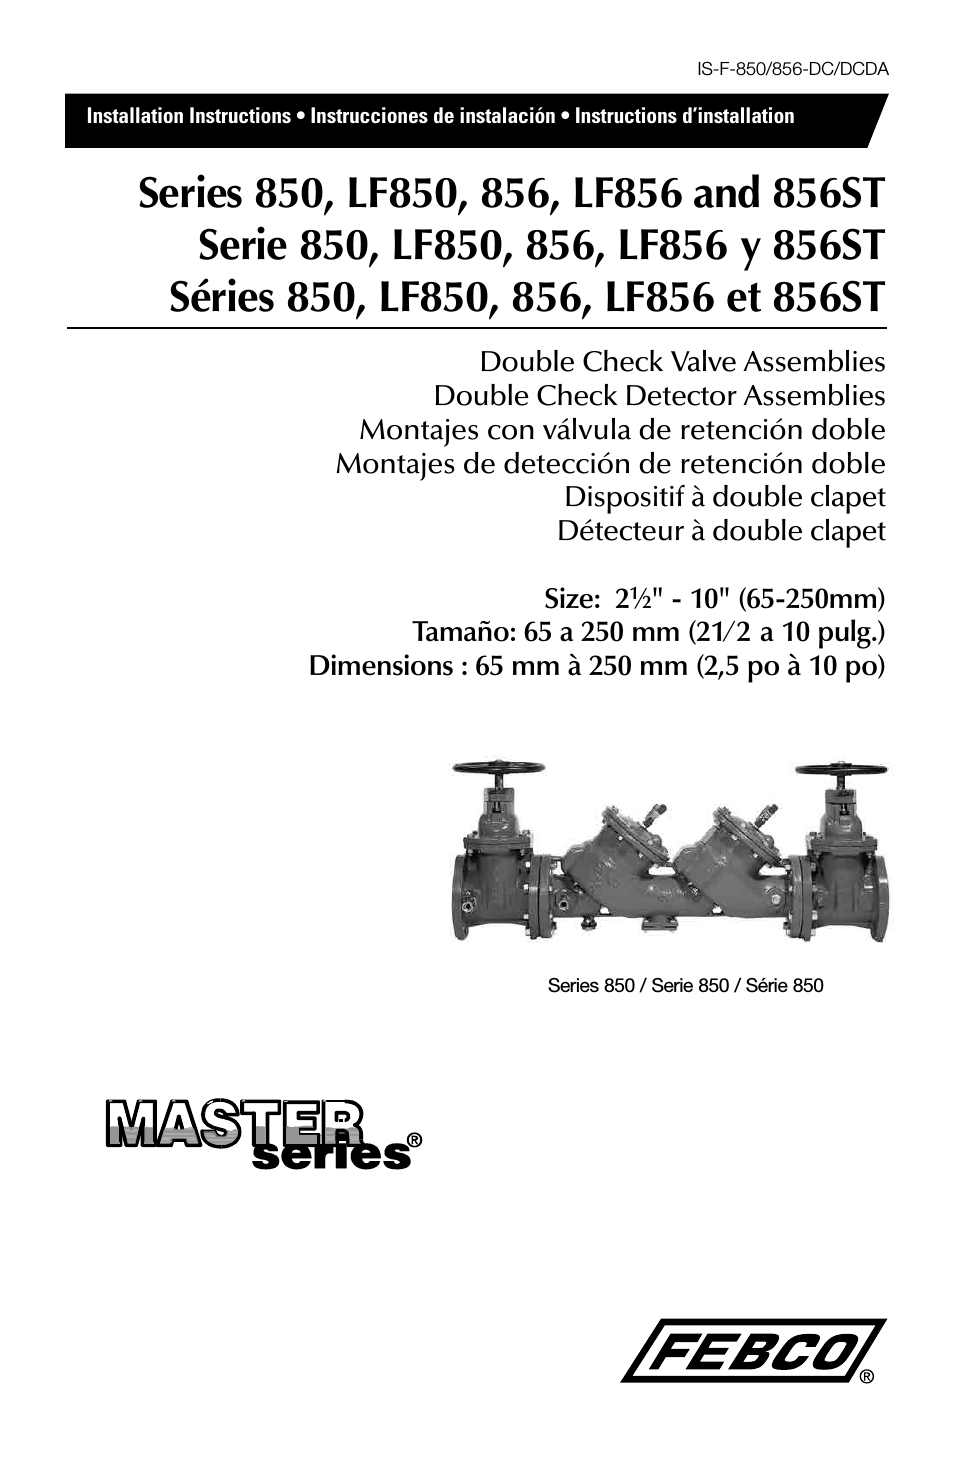 LF850 Lead Free MasterSeries In-Line Design Double Check Valve Assemblies - Large Diameter